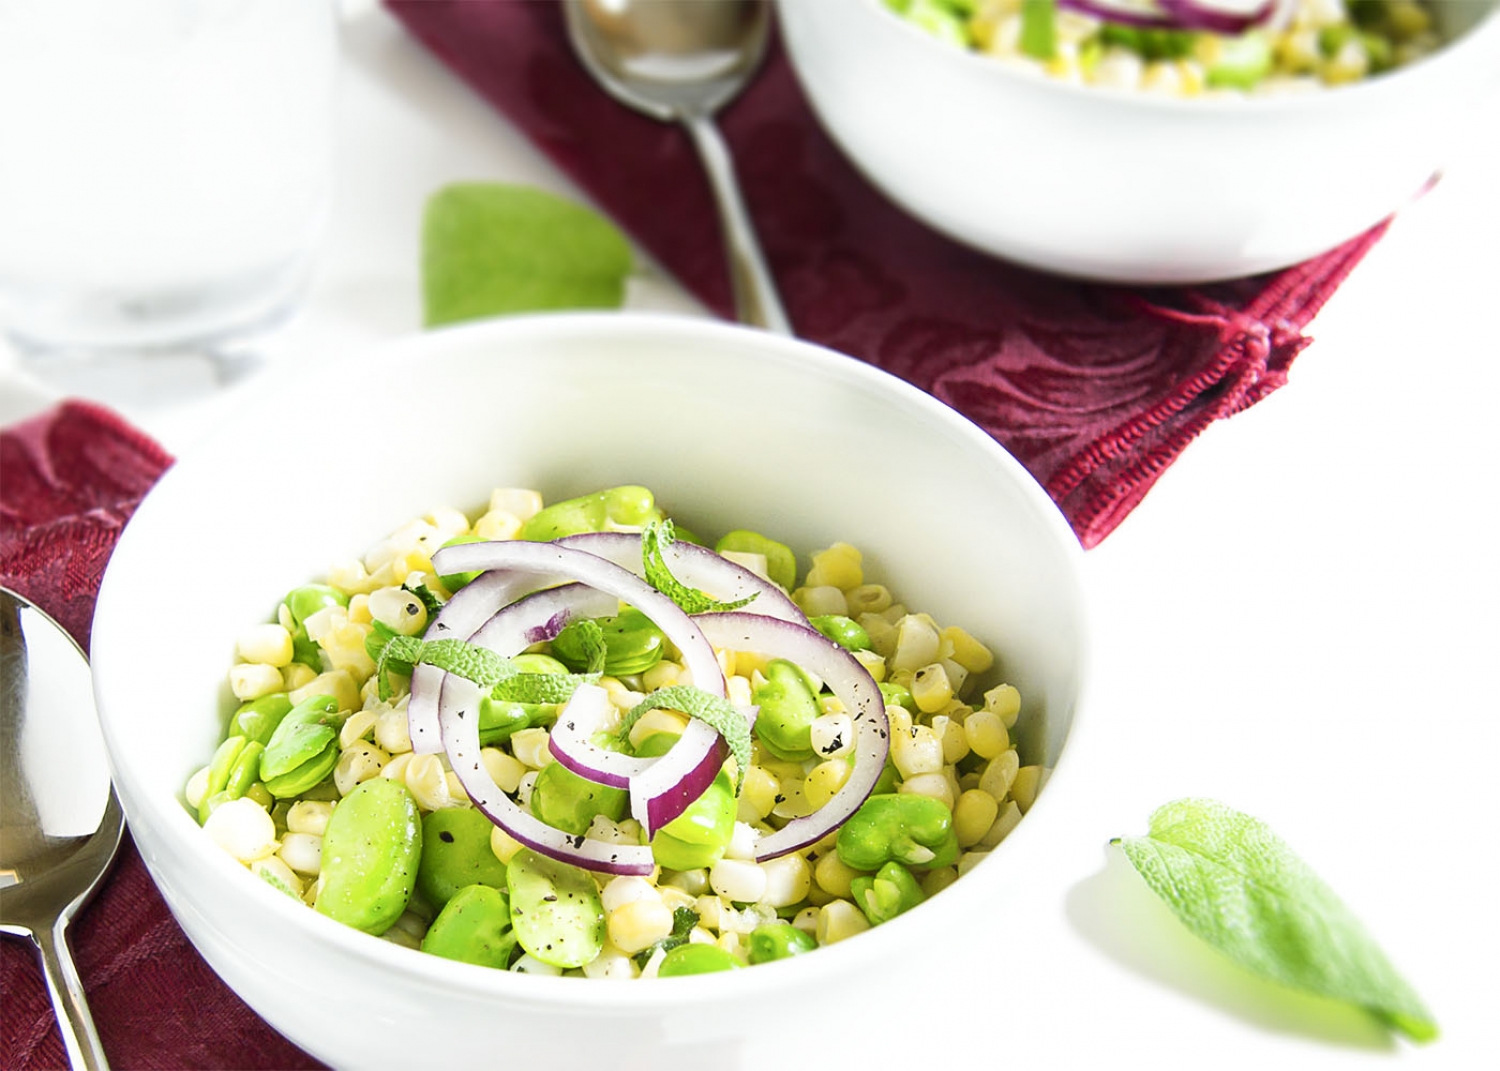 <p>Slightly nutty, slightly bitter and slightly sweet fava beans round out this crunchy corn salad that's perfect for warm weather gatherings or backyard dinners. Sage leaves add a lovely peppery finish, and you could even grill the corn beforehand for a smoky addition. <a href="https://www.justalittlebitofbacon.com/fresh-corn-fava-bean-salad/" rel="noopener">Get the recipe here.</a></p>